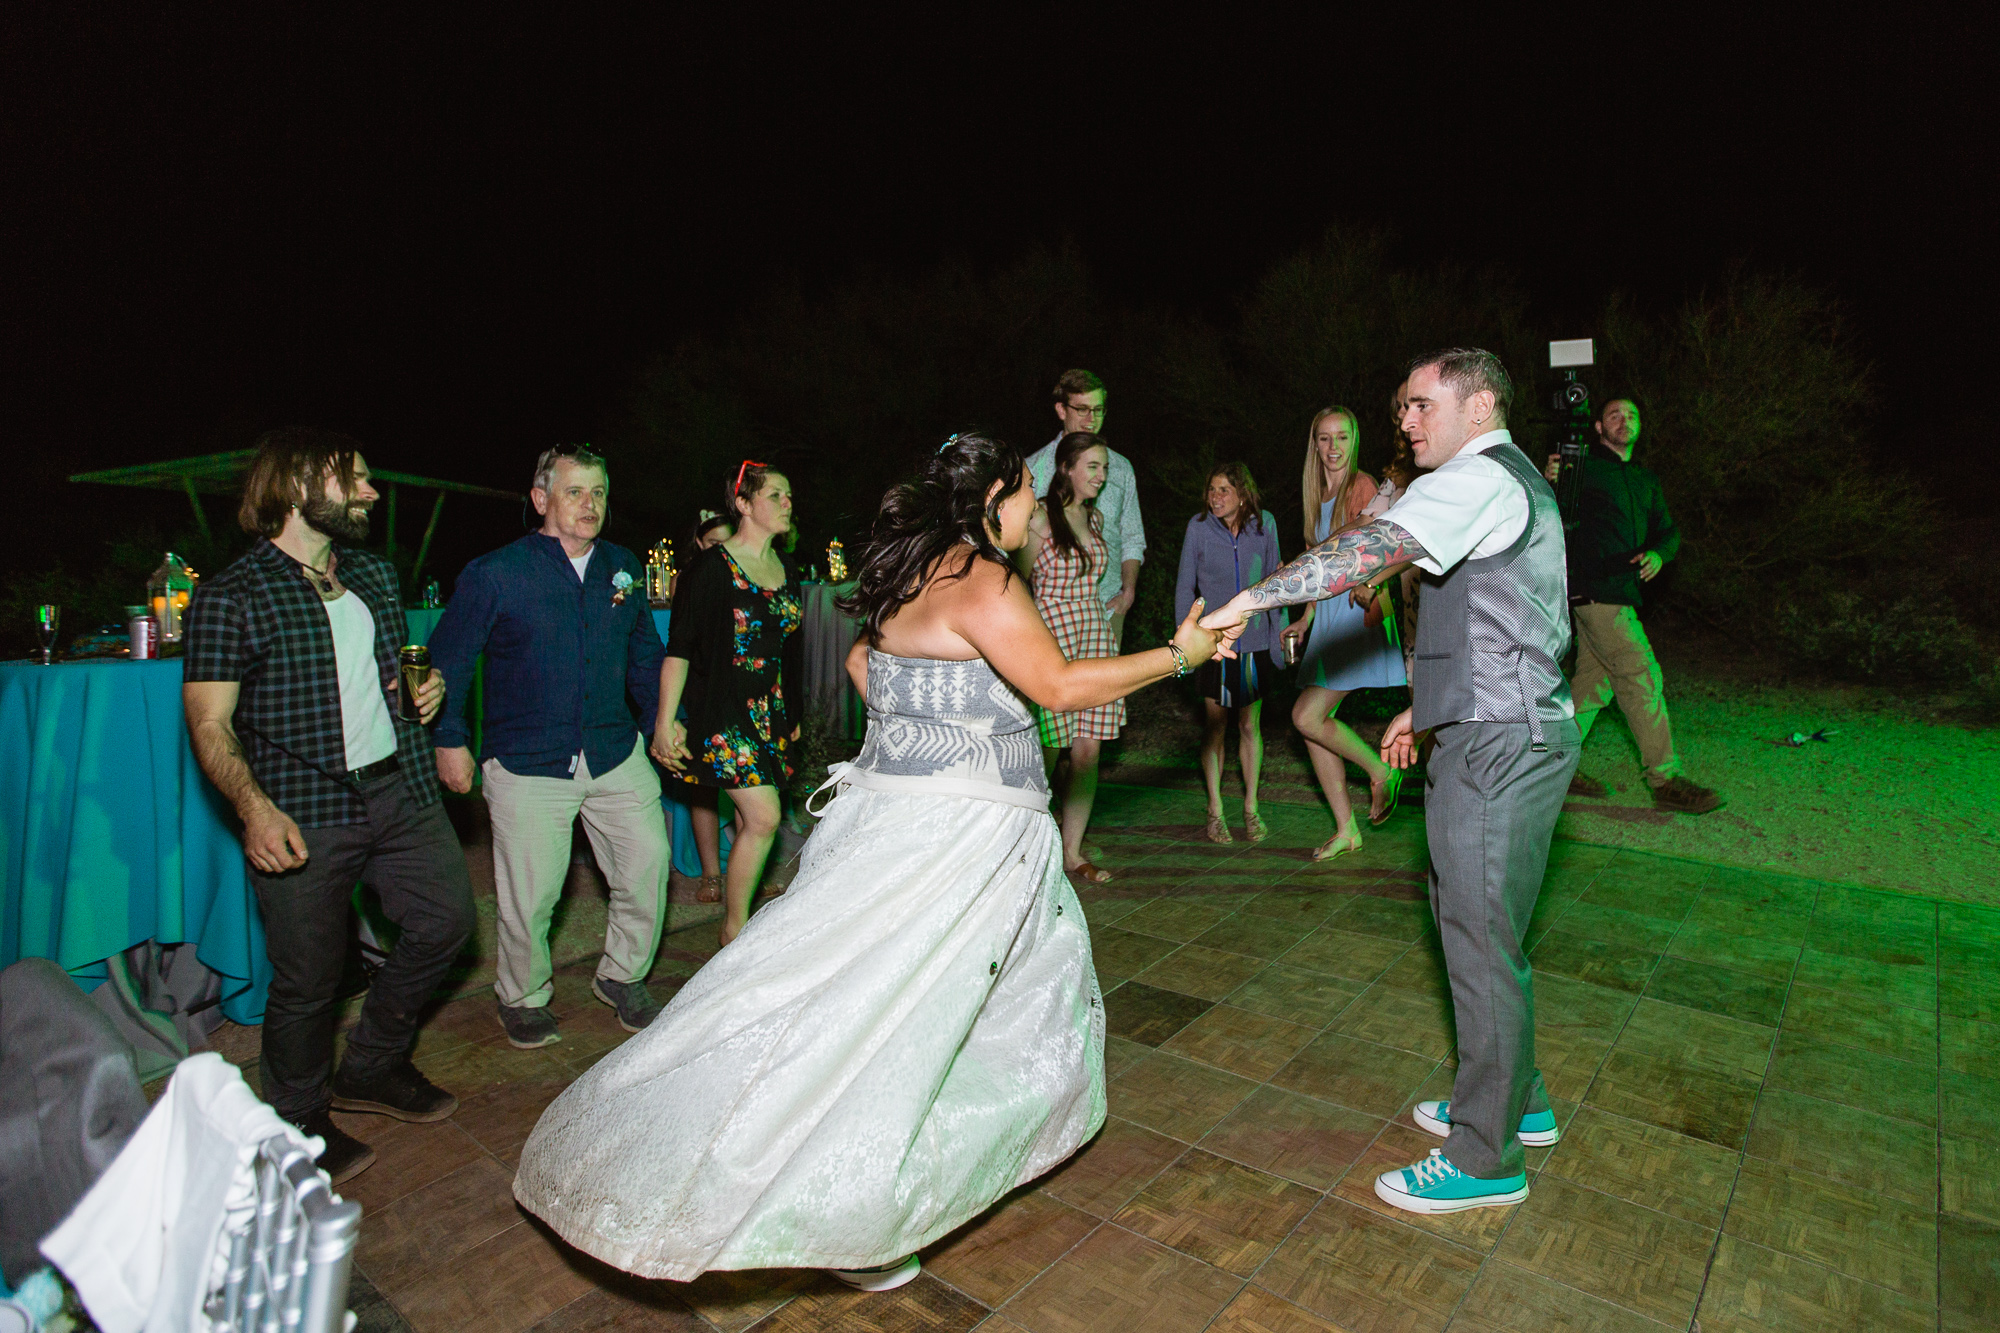 Bride and groom dancing with guests to an Irish song at their wedding reception by Arizona wedding photographer PMA Photography.